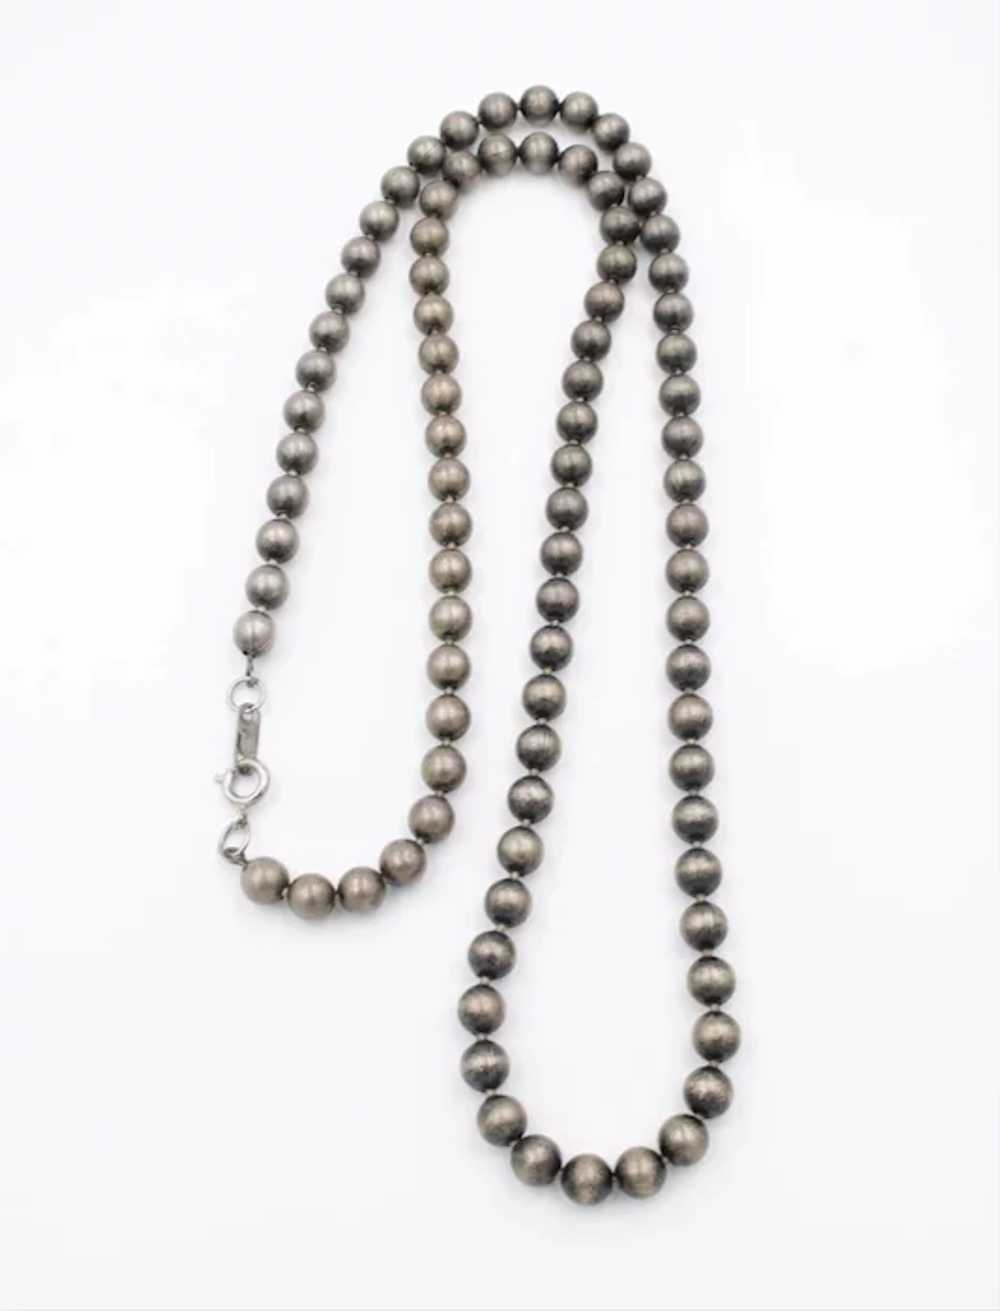 Necklace Signed Pewter Metal Bead Chain Strand - image 4